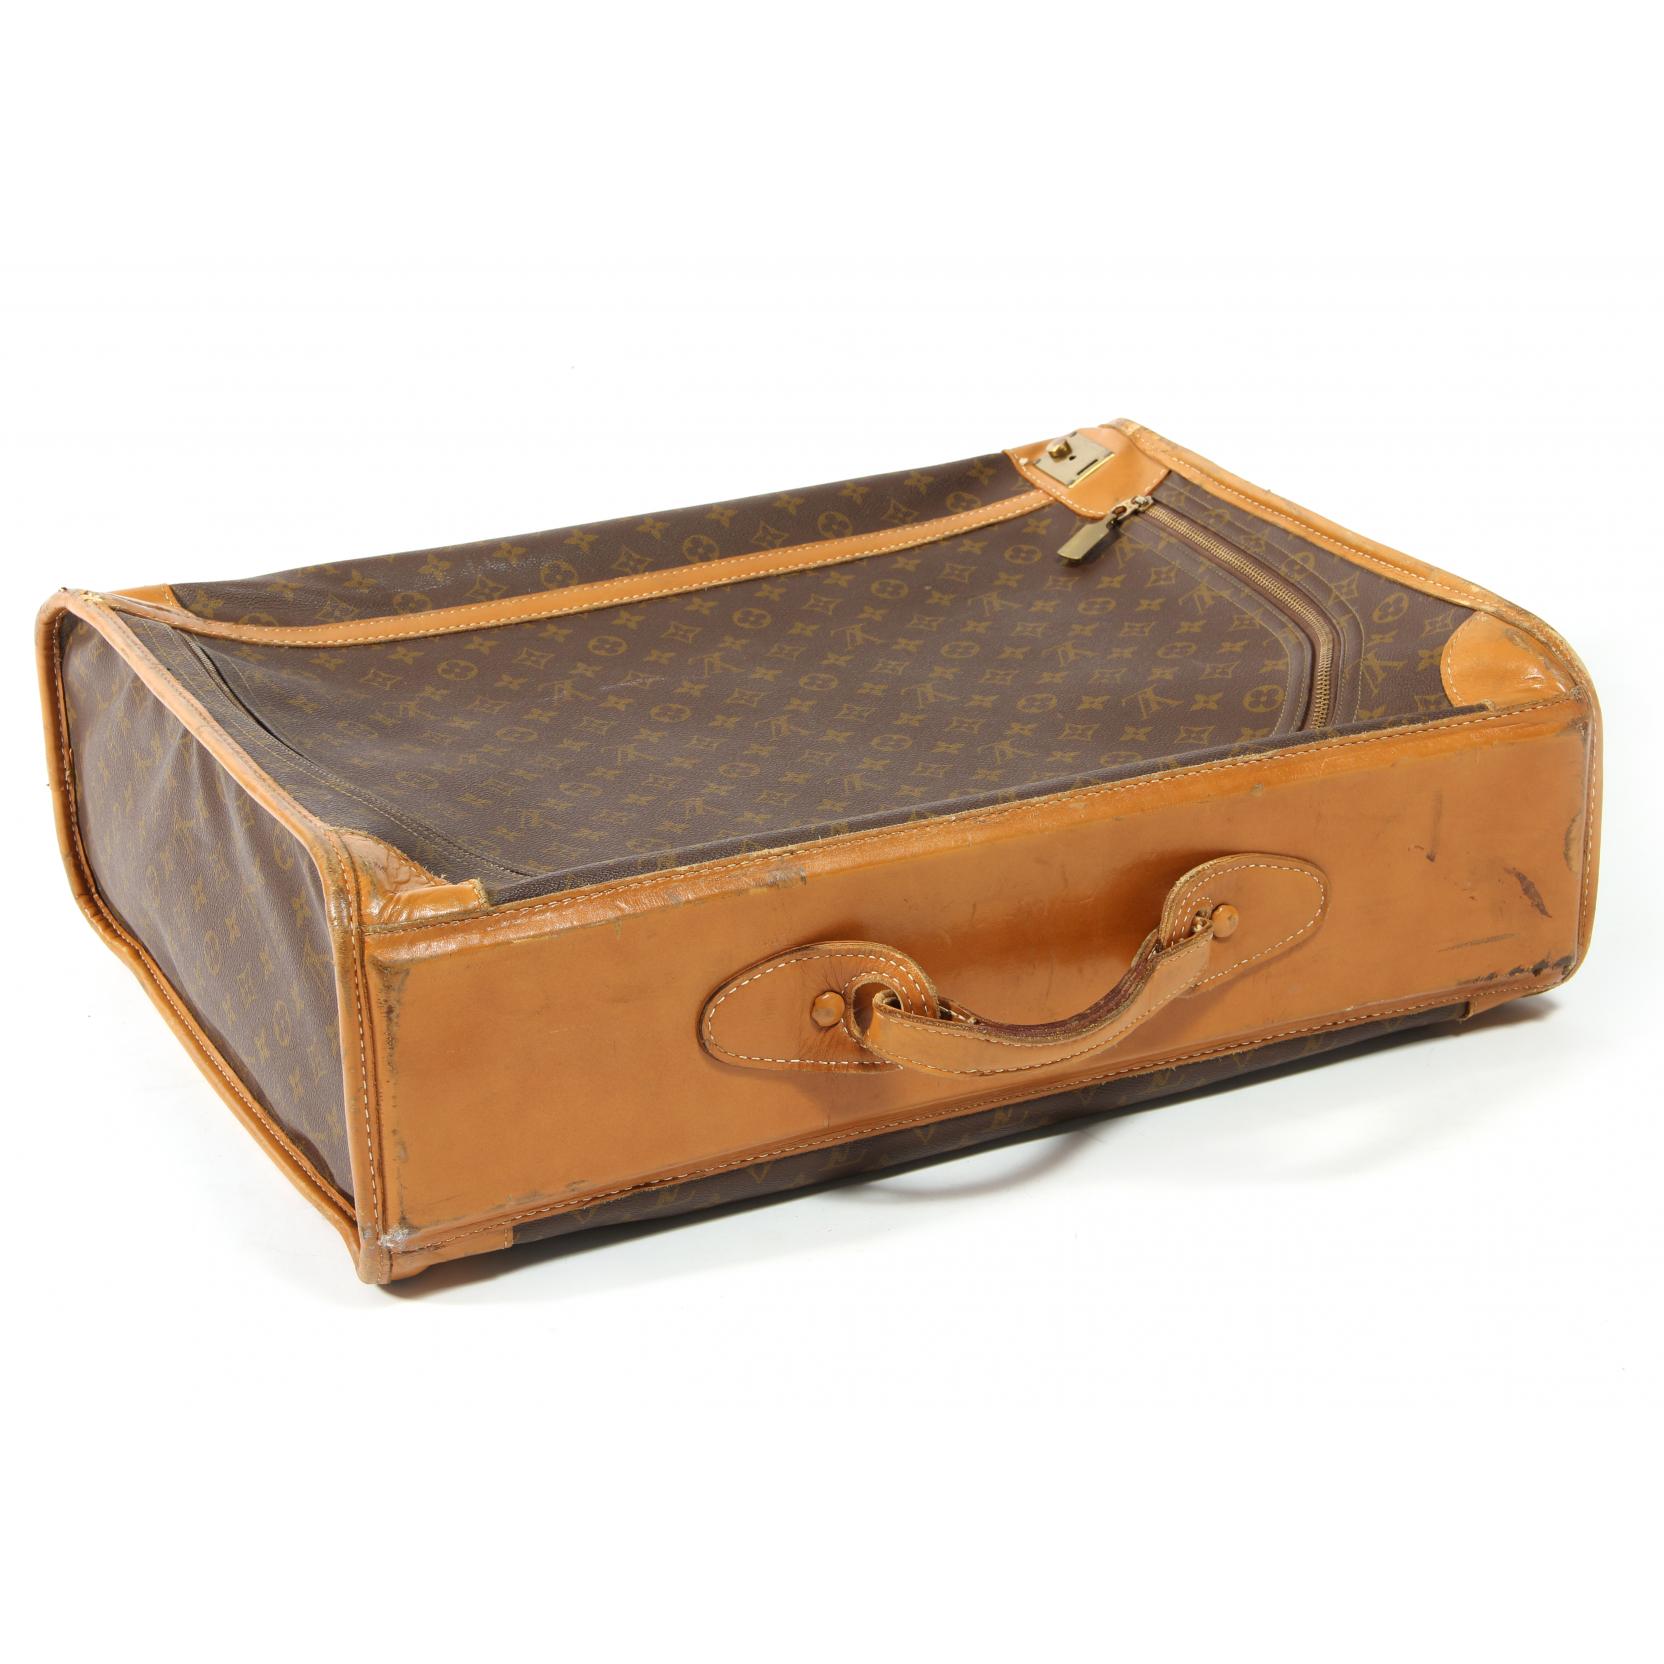 Two Pullman Suitcases, The French Company for Louis Vuitton (Lot 59 -  Estate Jewelry & FashionOct 28, 2015, 6:00pm)